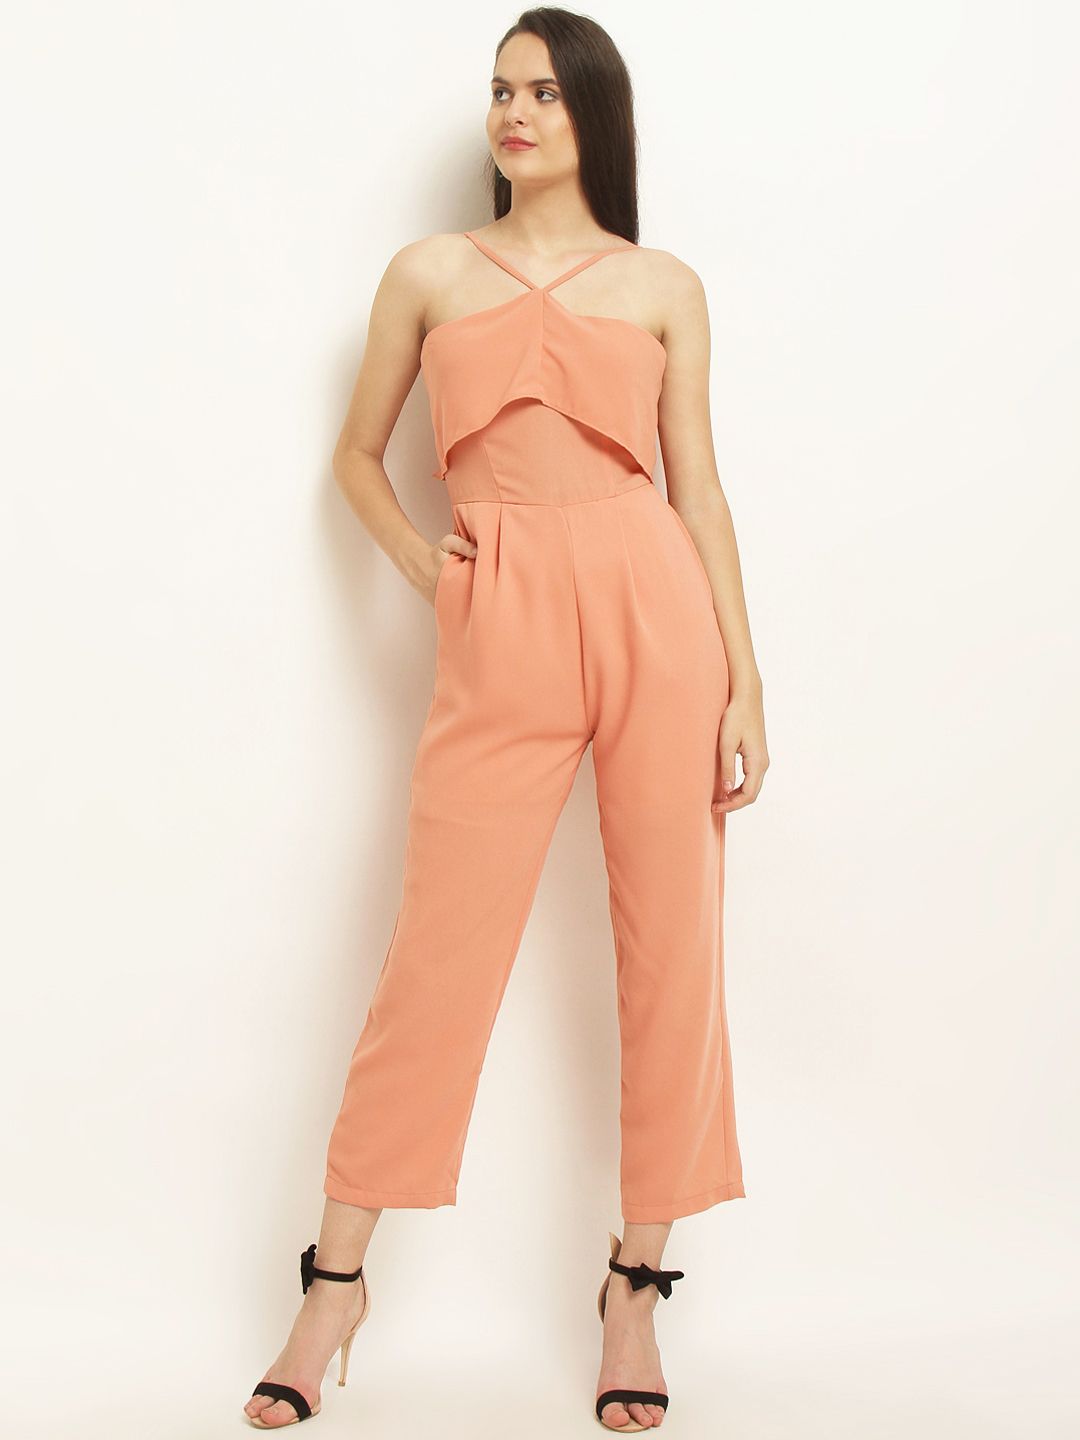 Marie Claire Peach-Coloured Solid Basic Jumpsuit Price in India